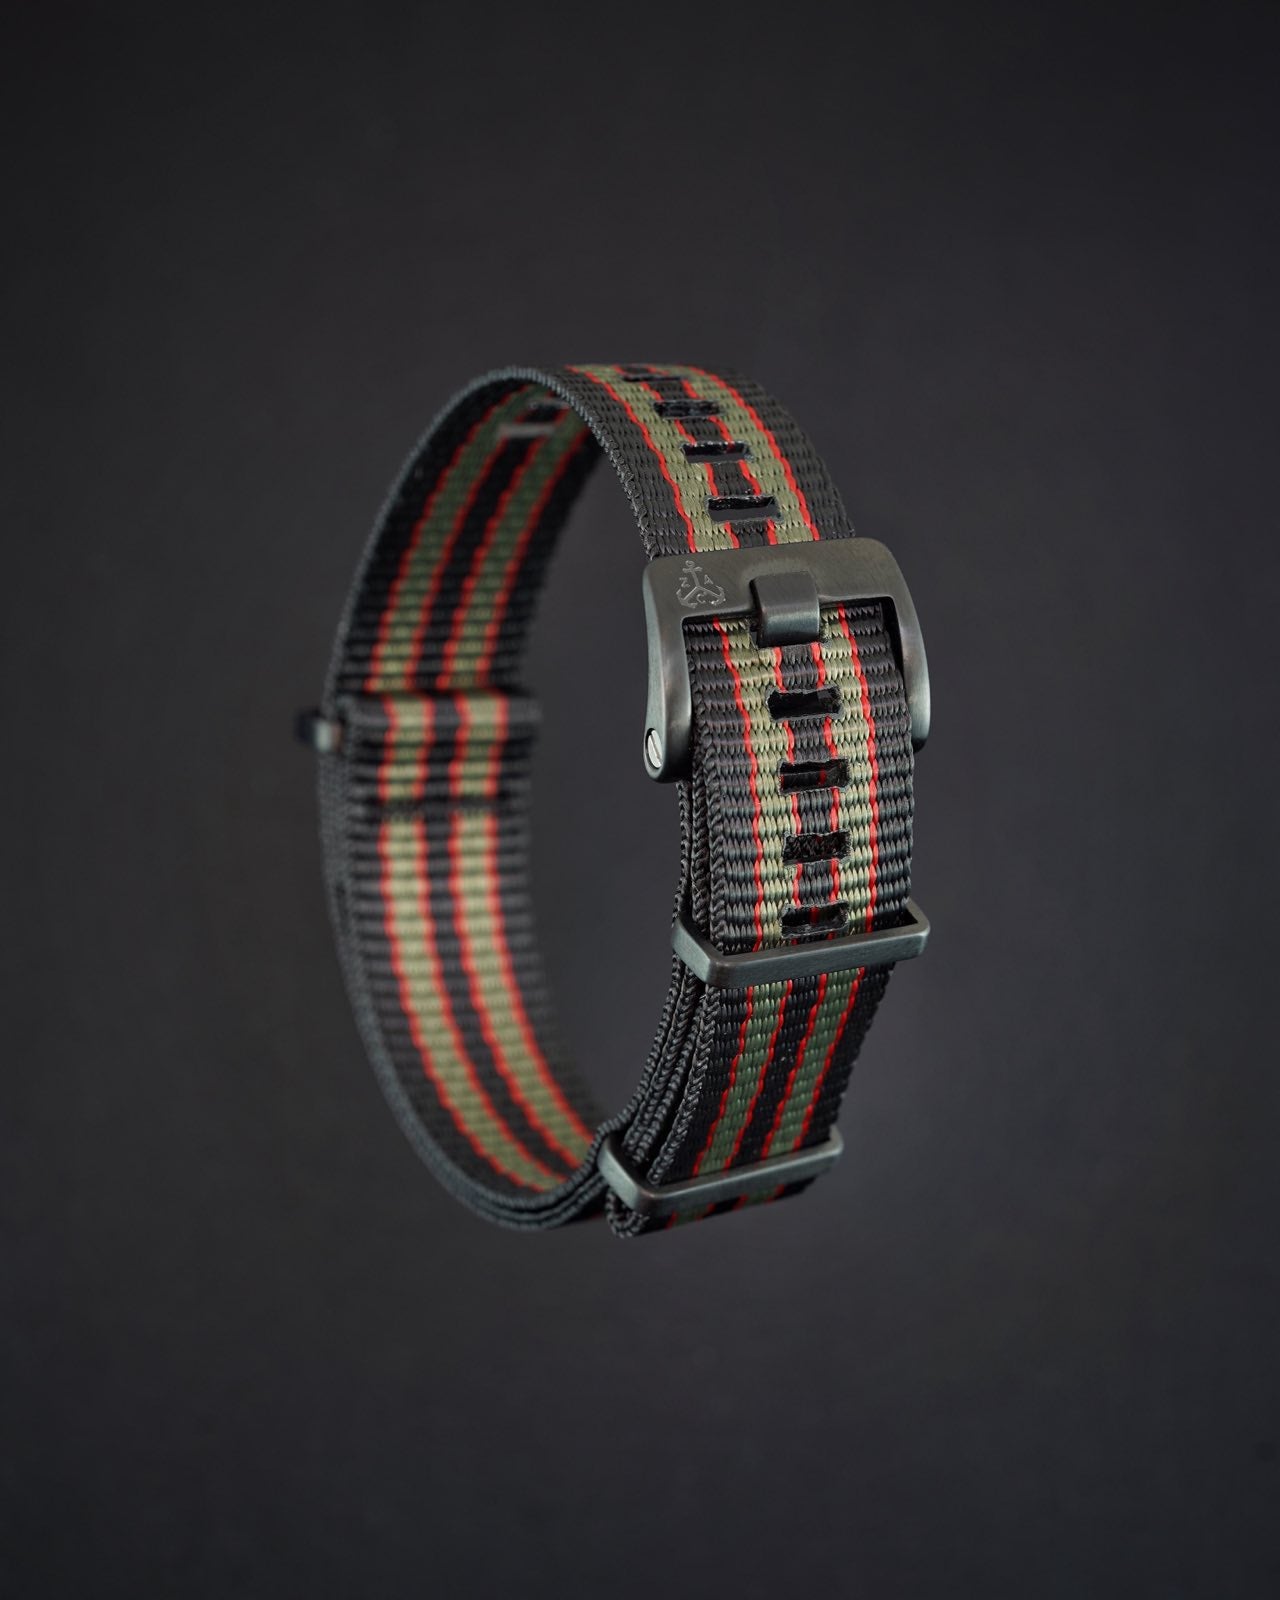 Connery inspired watch strap